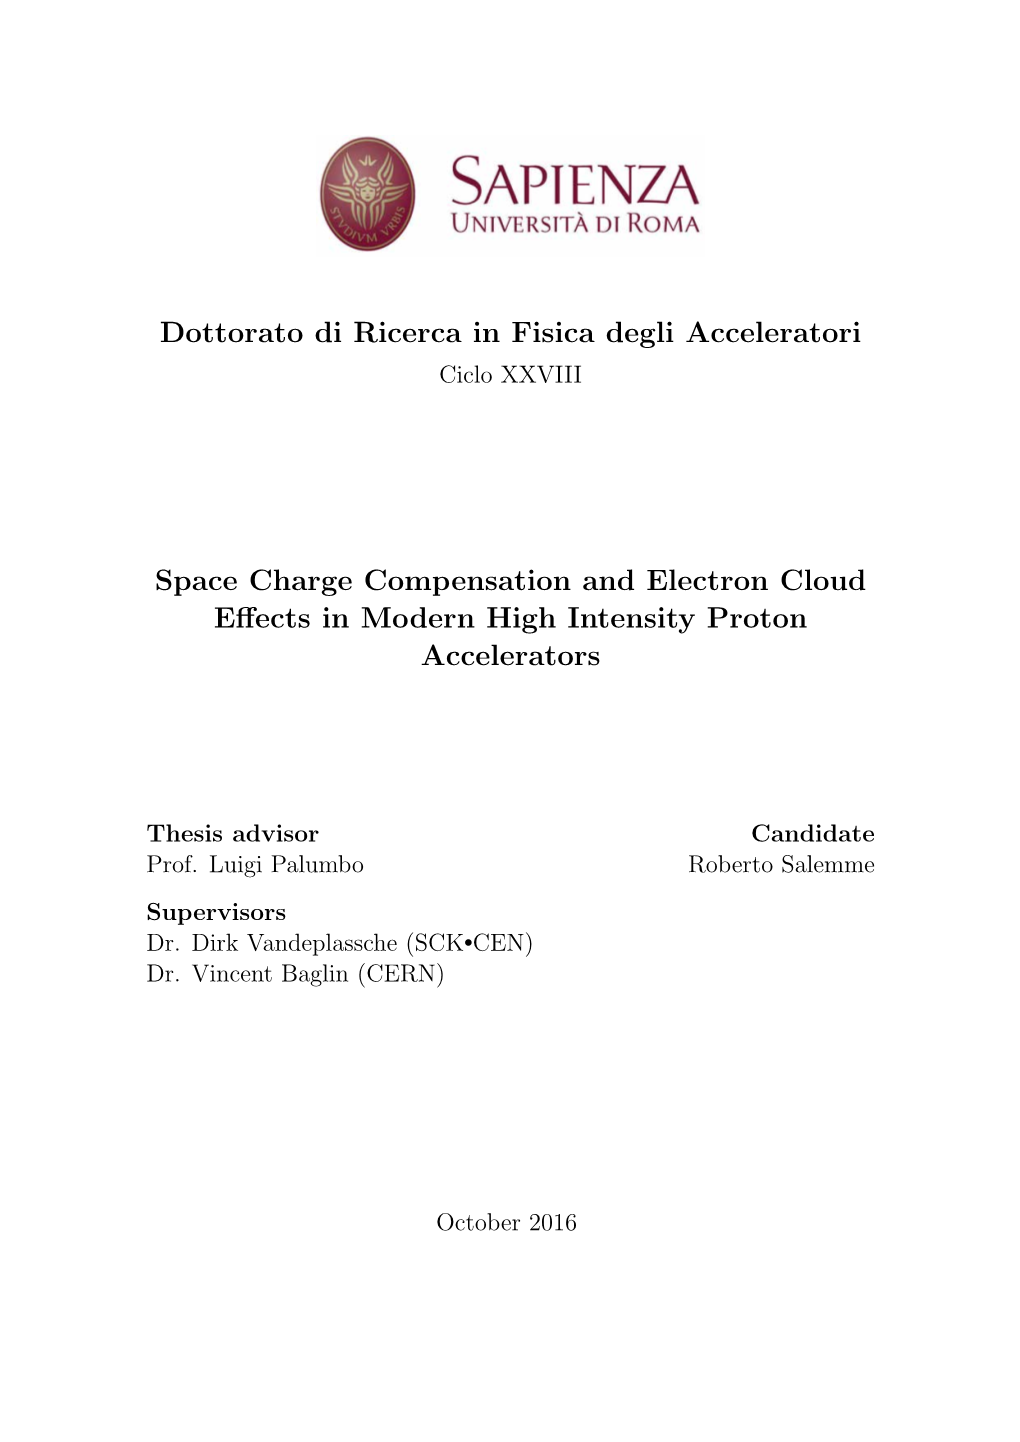 Space Charge Compensation and Electron Cloud Effects in Modern